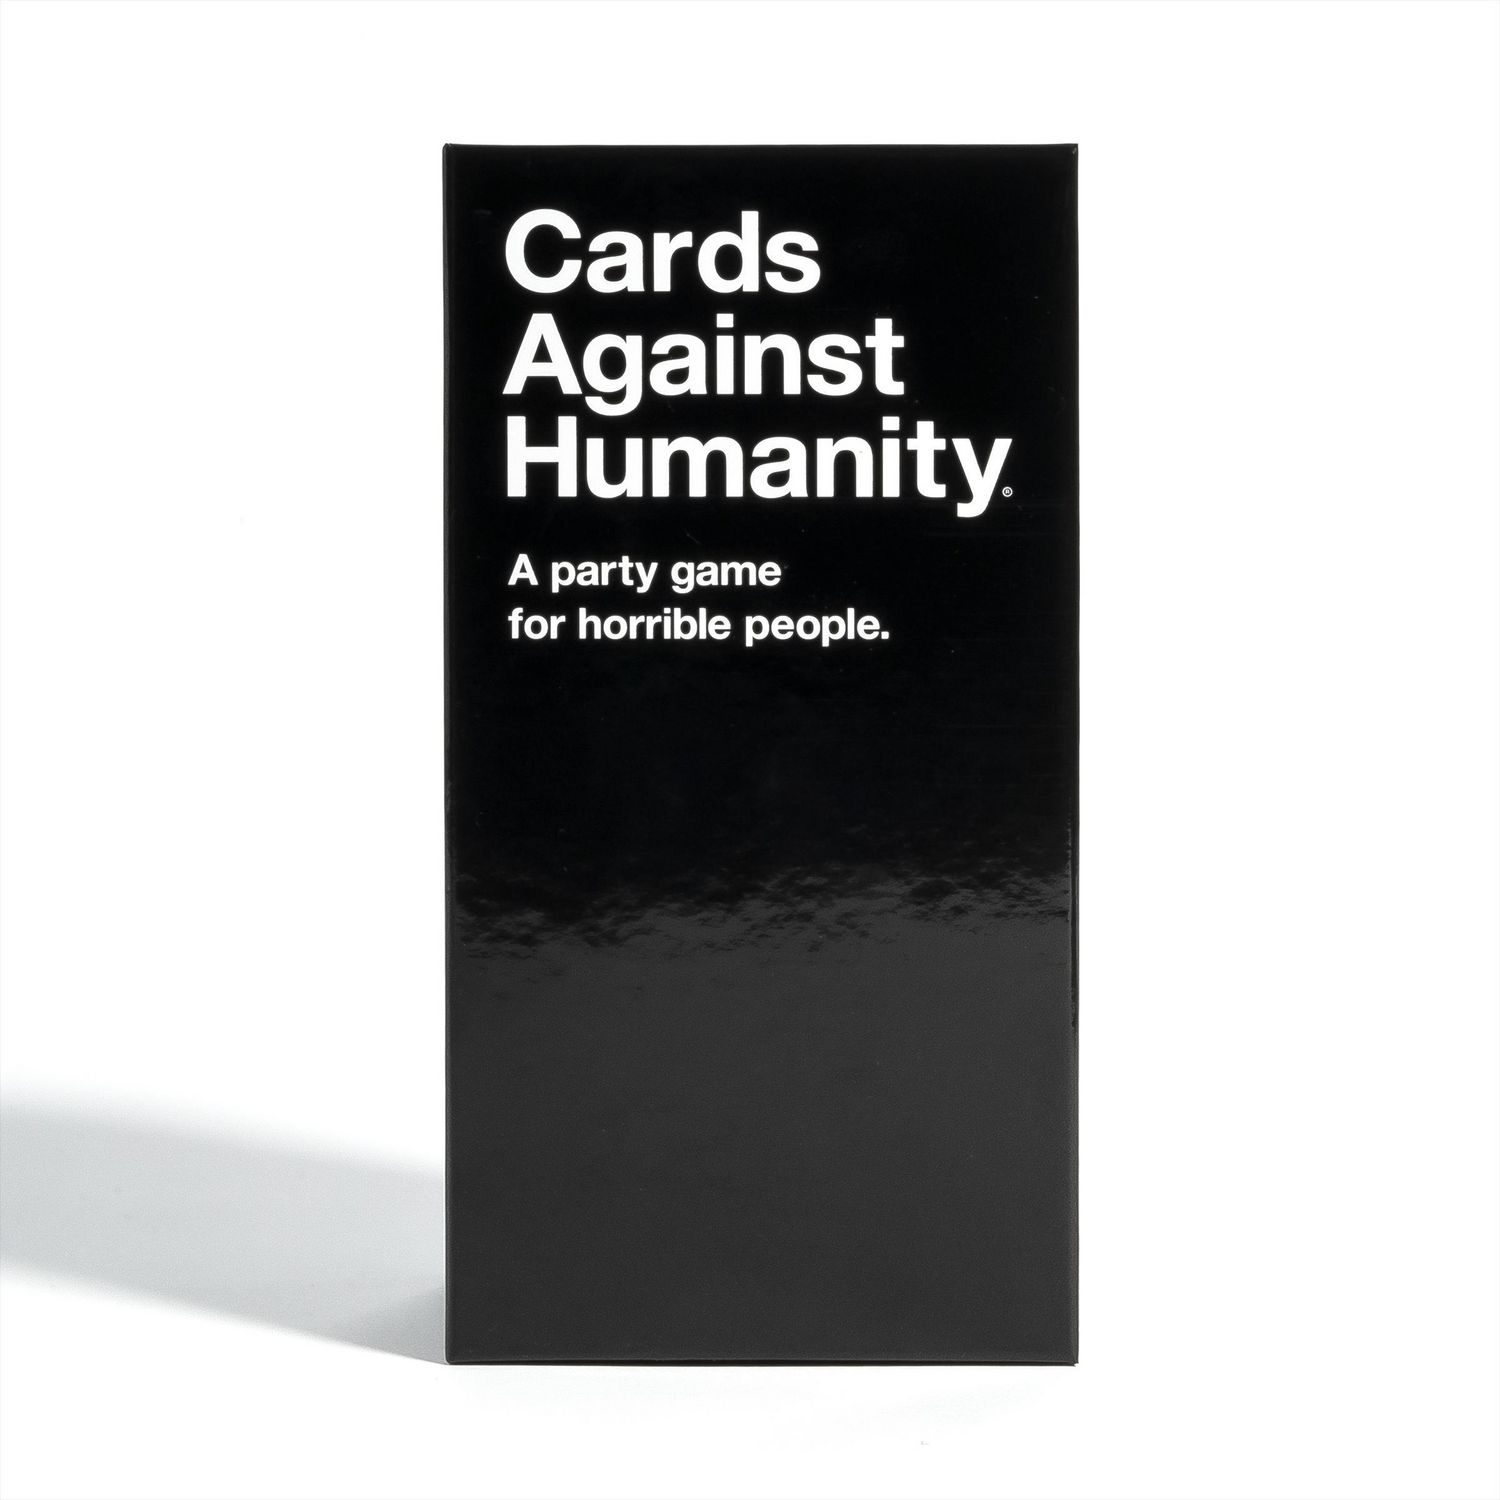 Jcards' cards against humanity